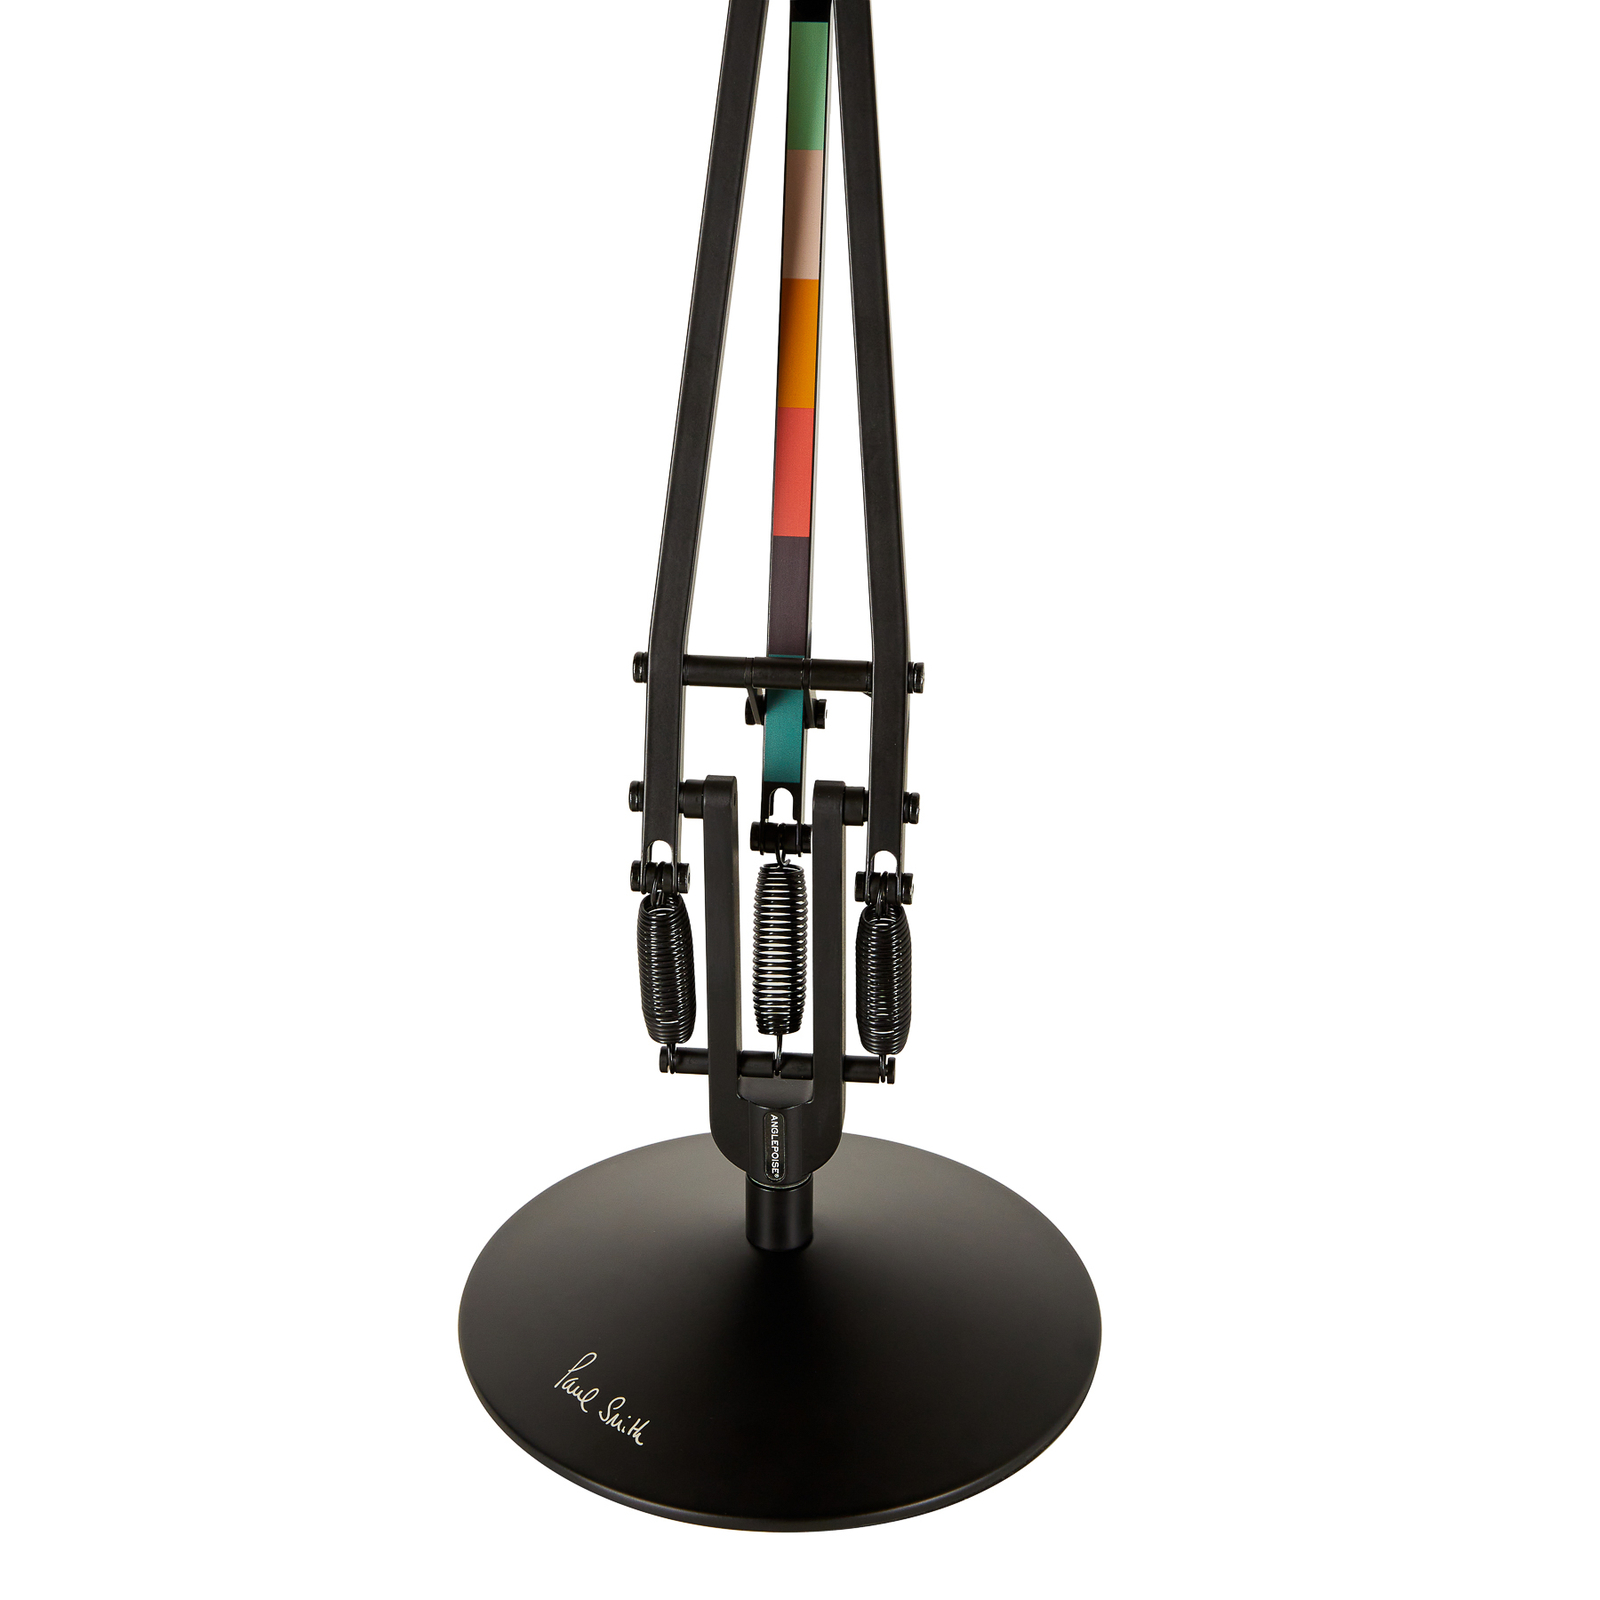 Anglepoise Type 75 Tischlampe Paul Smith Edition 5